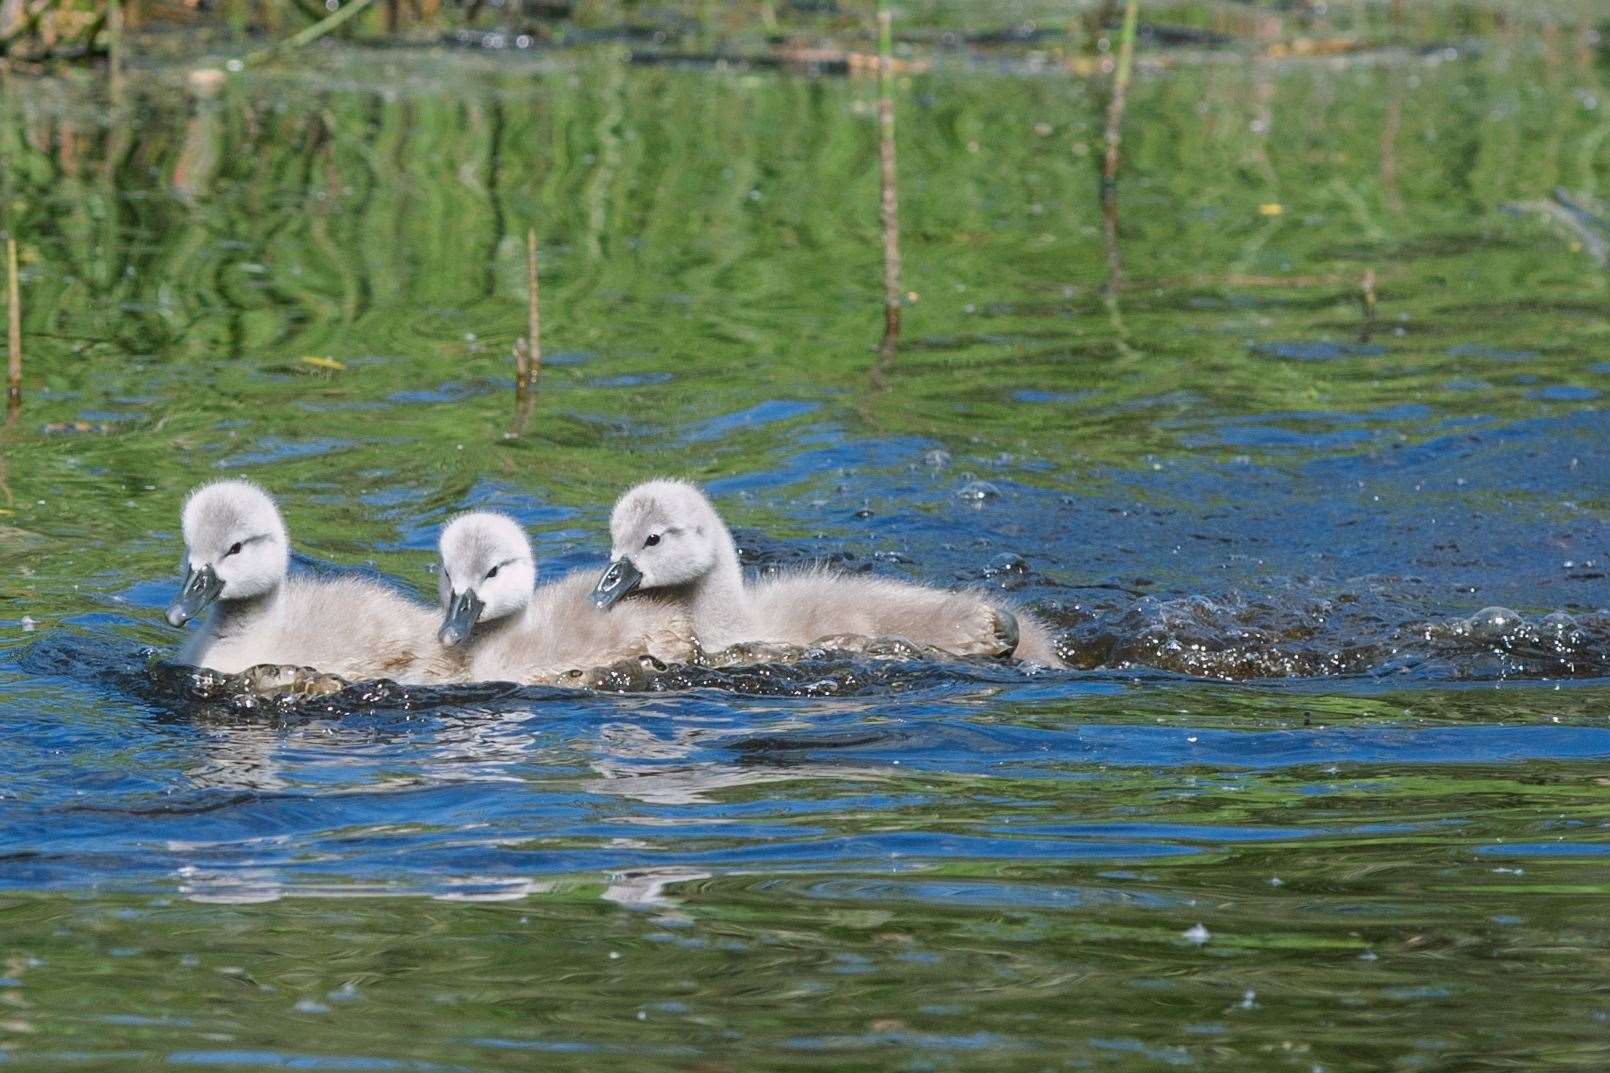 Three of the cygnets messing around on the pond.